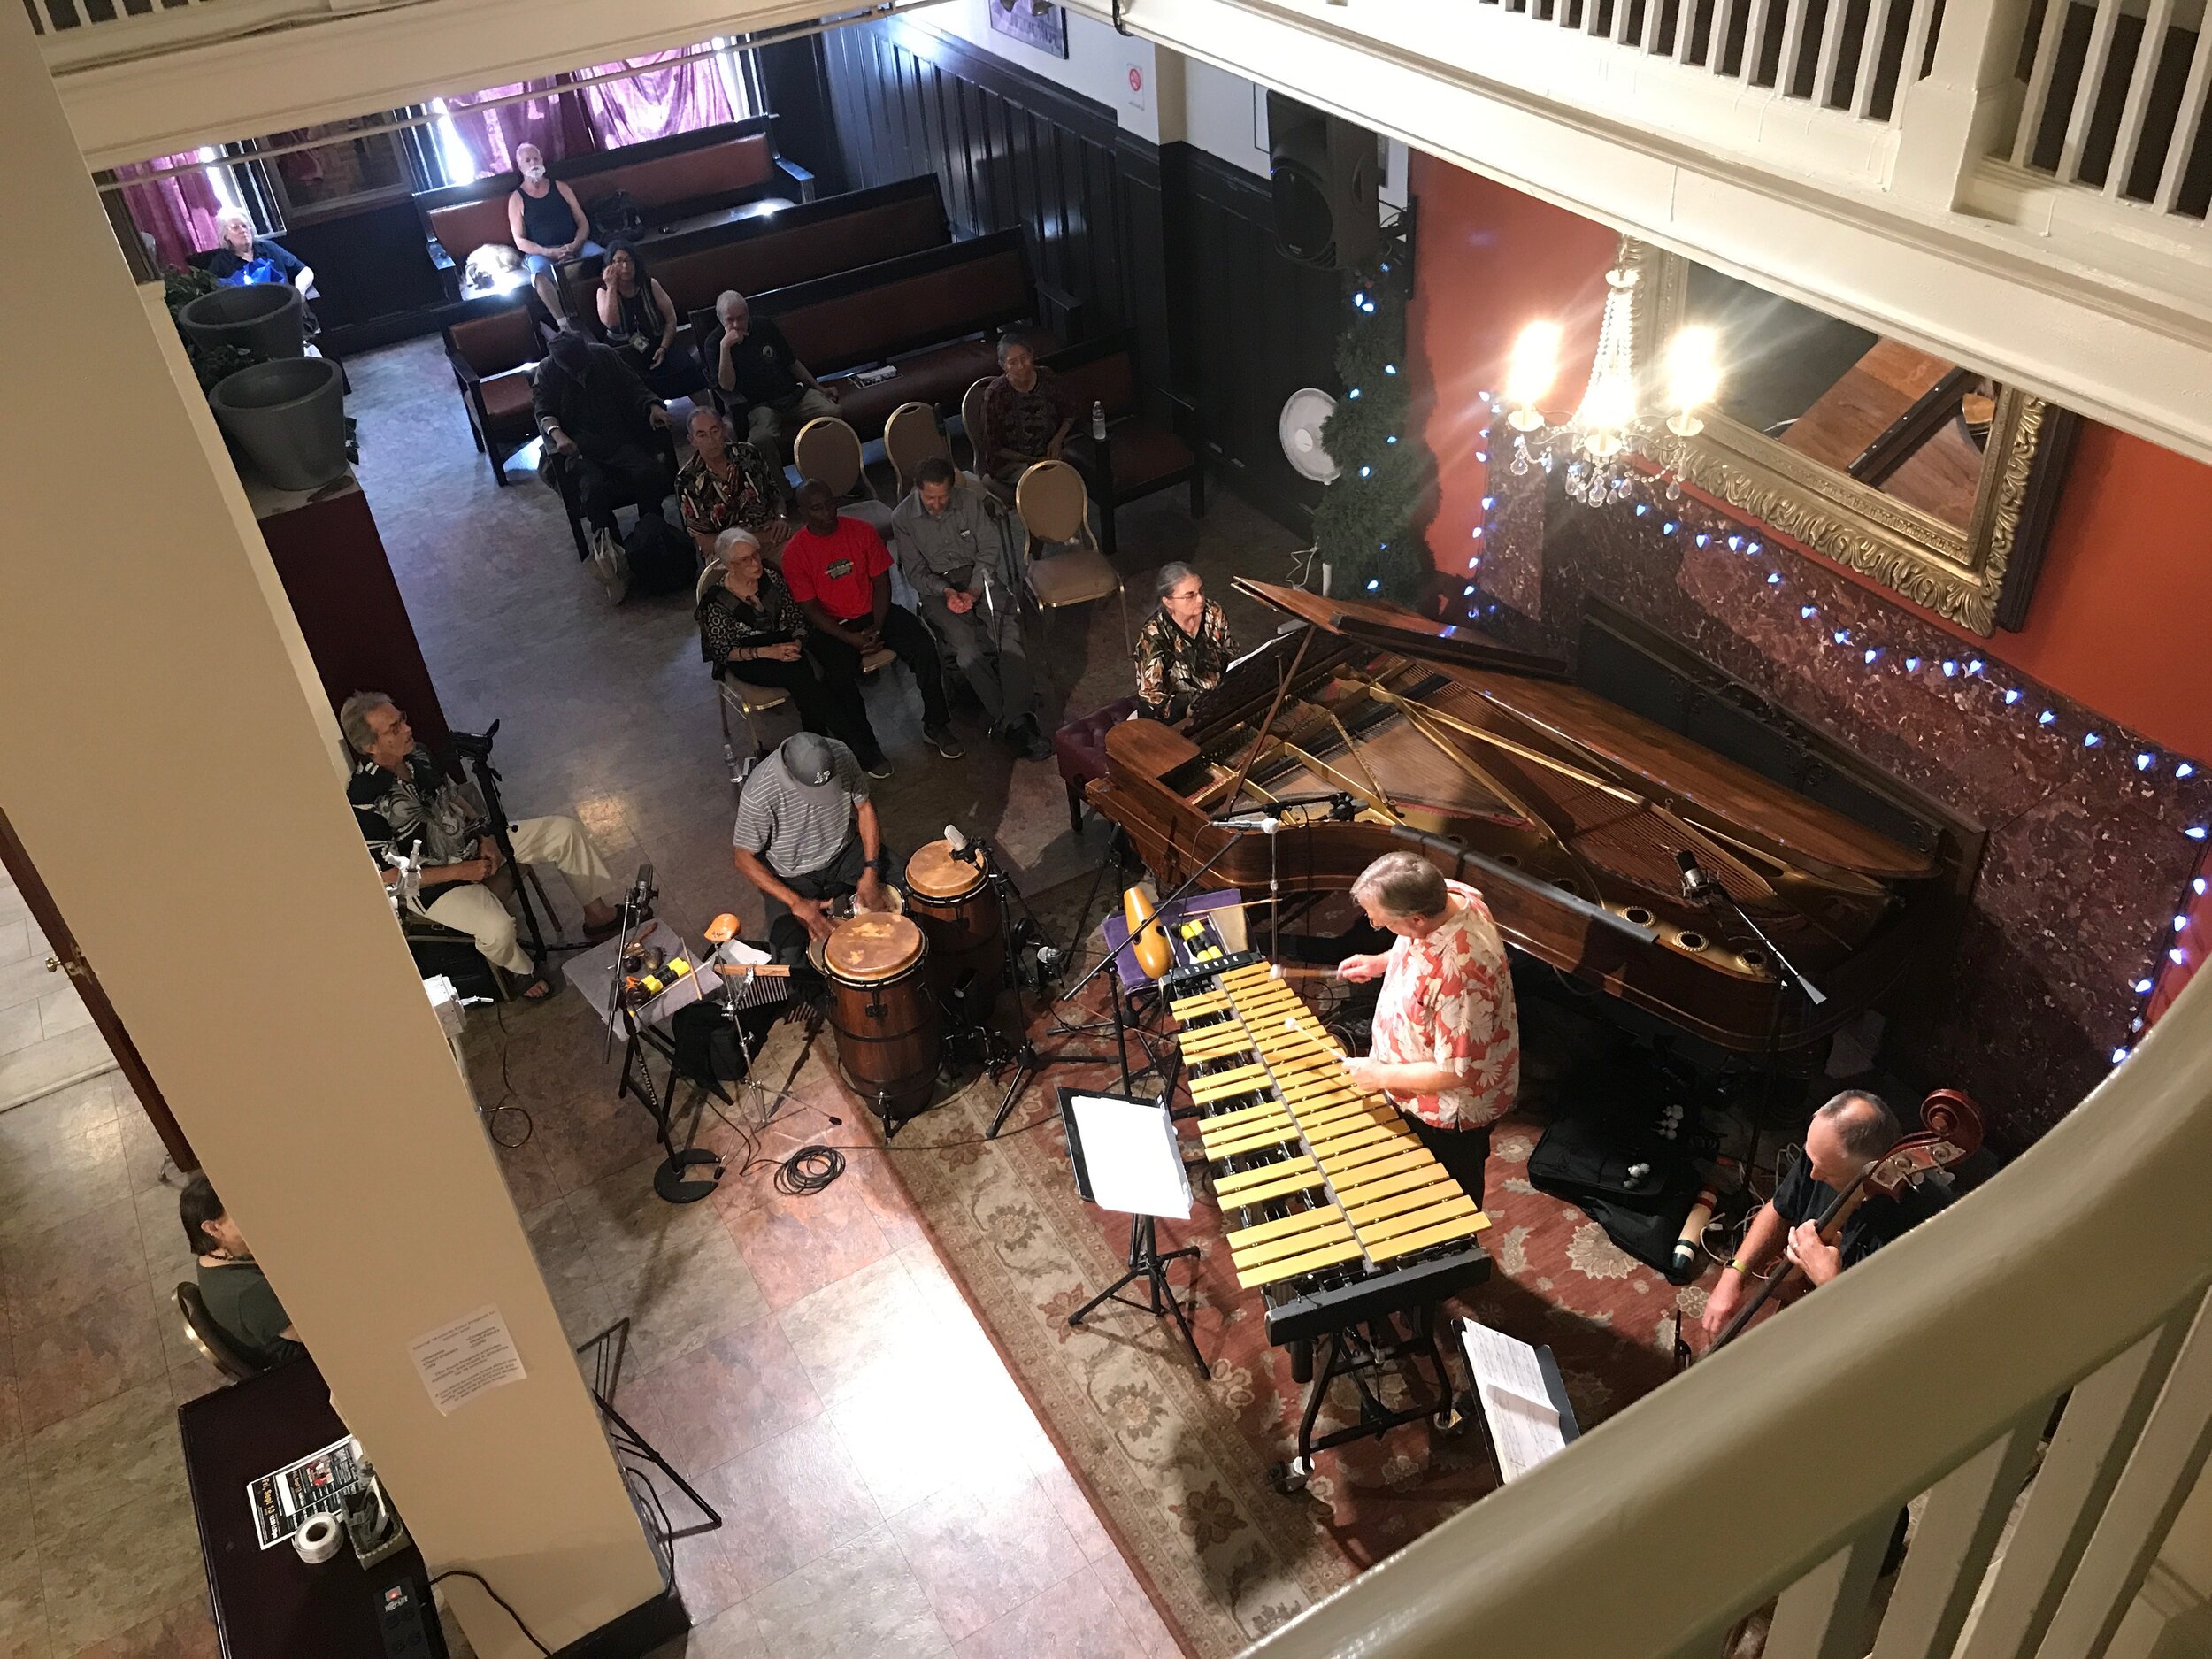  A jazz group performs a free concert in the lobby of the Cadillac Hotel, one of the residential hotels that came to characterize San Francisco's Tenderloin district. Most are now owned by nonprofit organizations who rent single rooms to low-income i